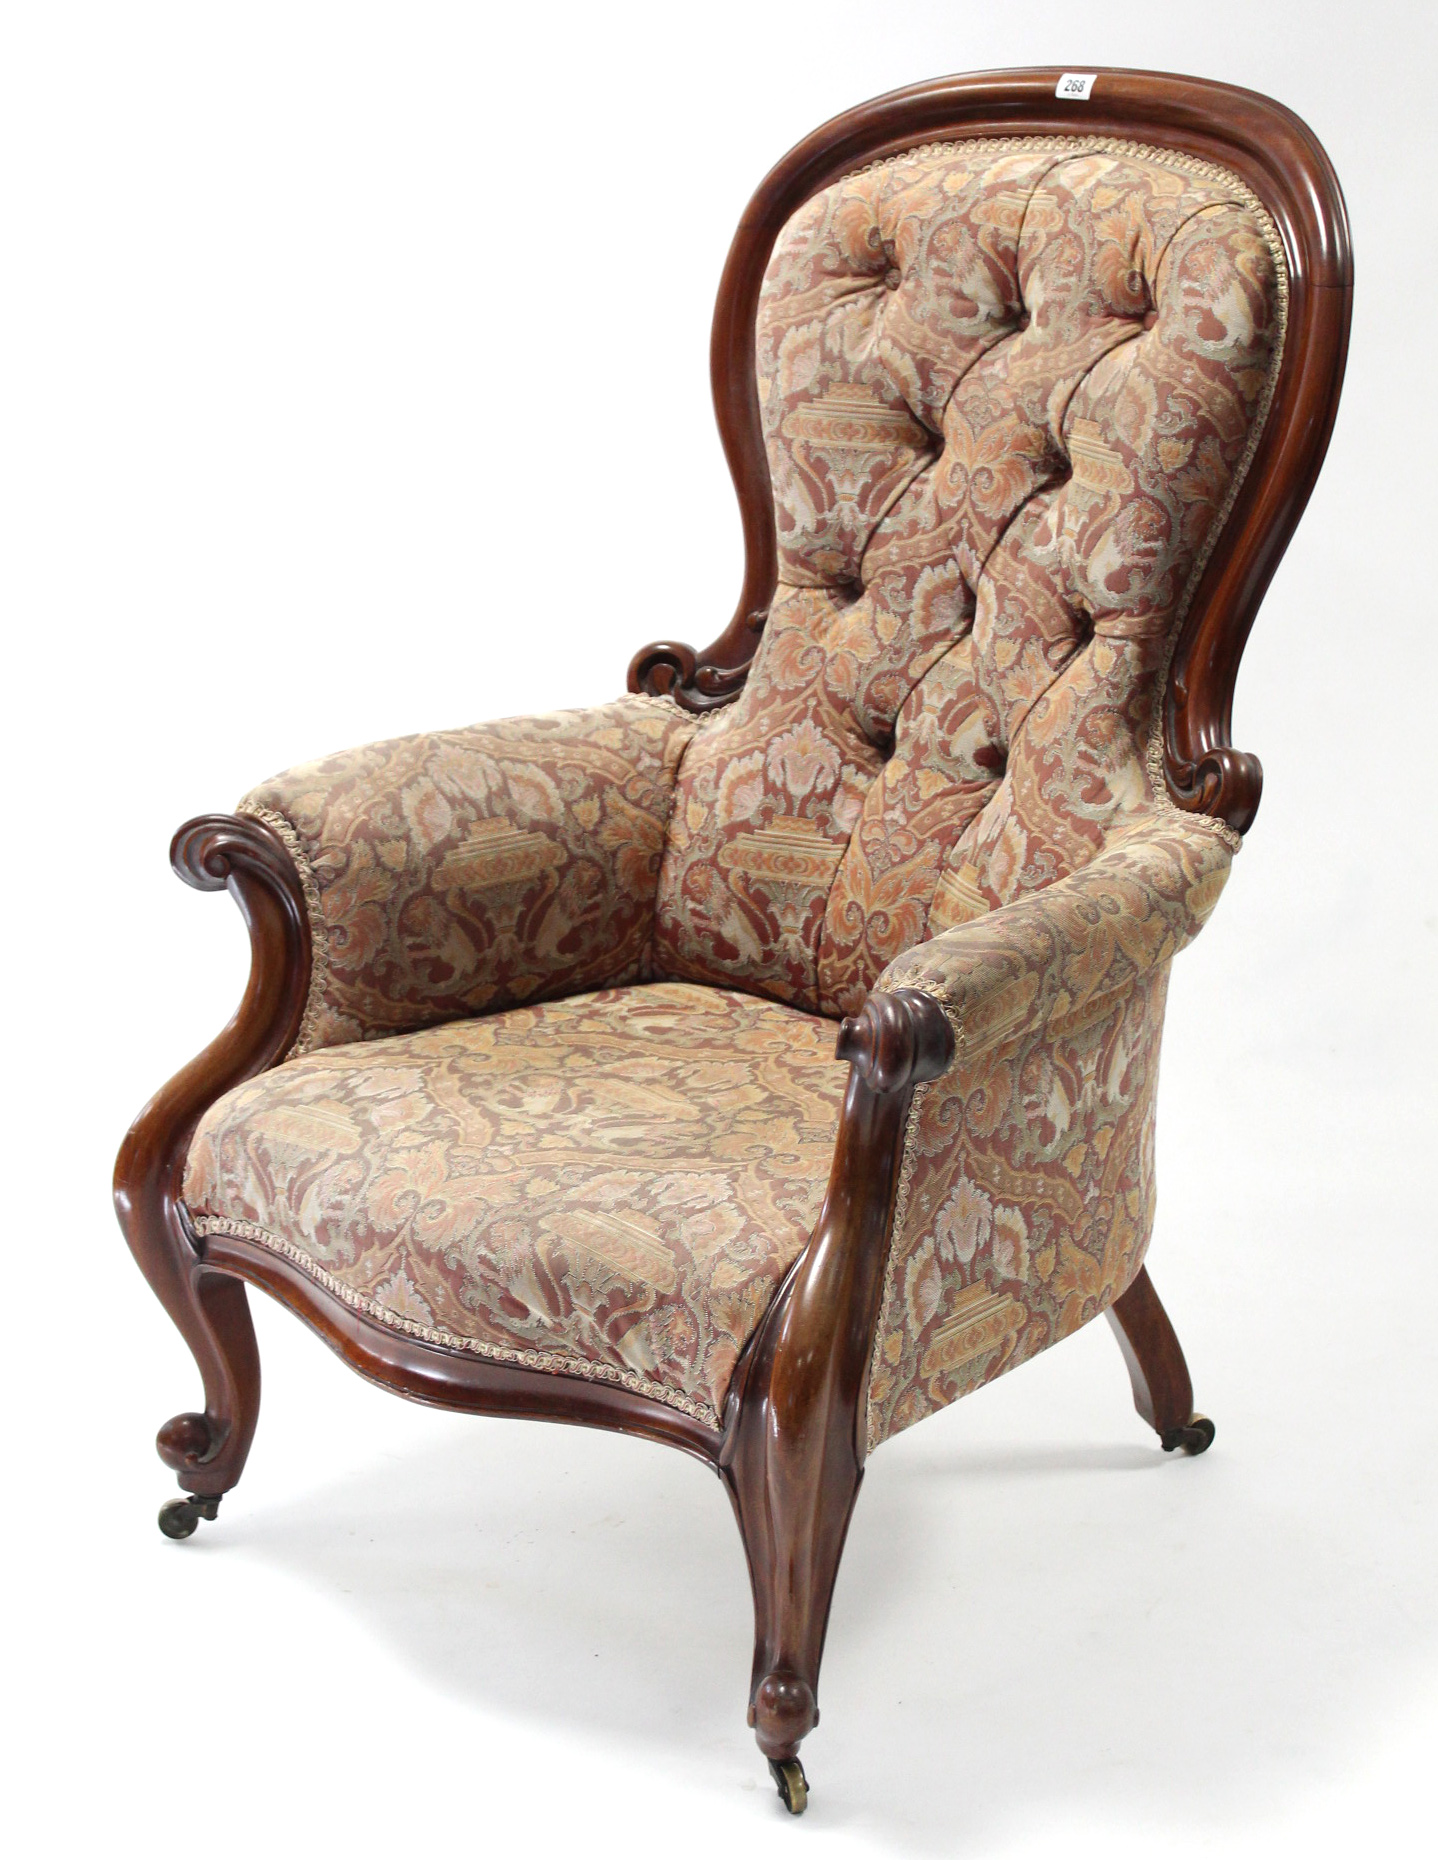 A Victorian carved mahogany-frame armchair with buttoned spoon-shaped back & sprung seat upholstered